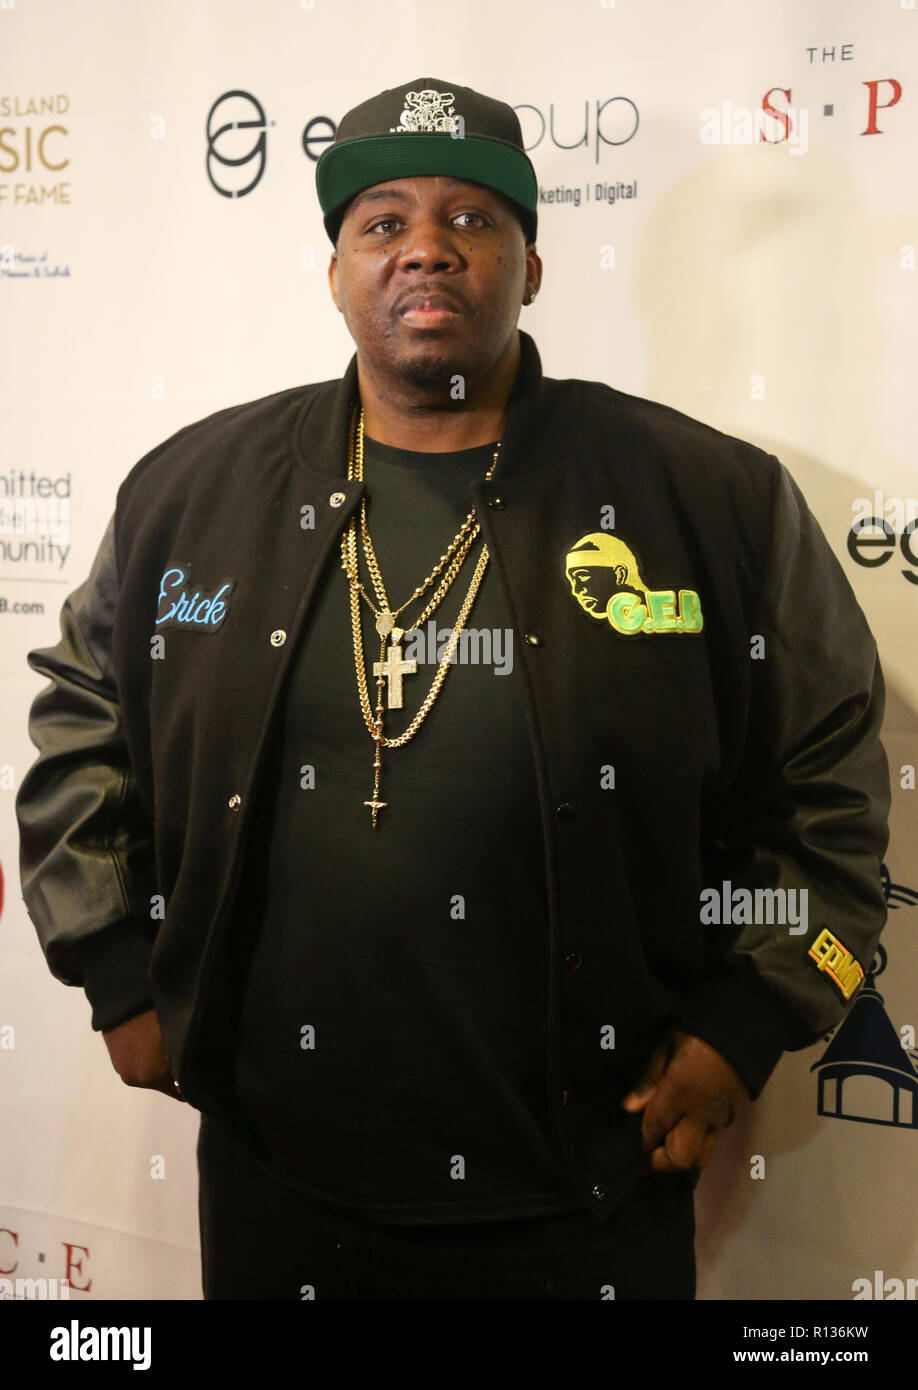 Westbury, New York, USA. 8th Nov 2018. Rapper Erick Sermon of EPMD attends the 2018 Long Island Music Hall of Fame induction ceremony at The Space at Westbury on November 8, 2018 in Westbury, New York. Credit: AKPhoto/Alamy Live News Stock Photo